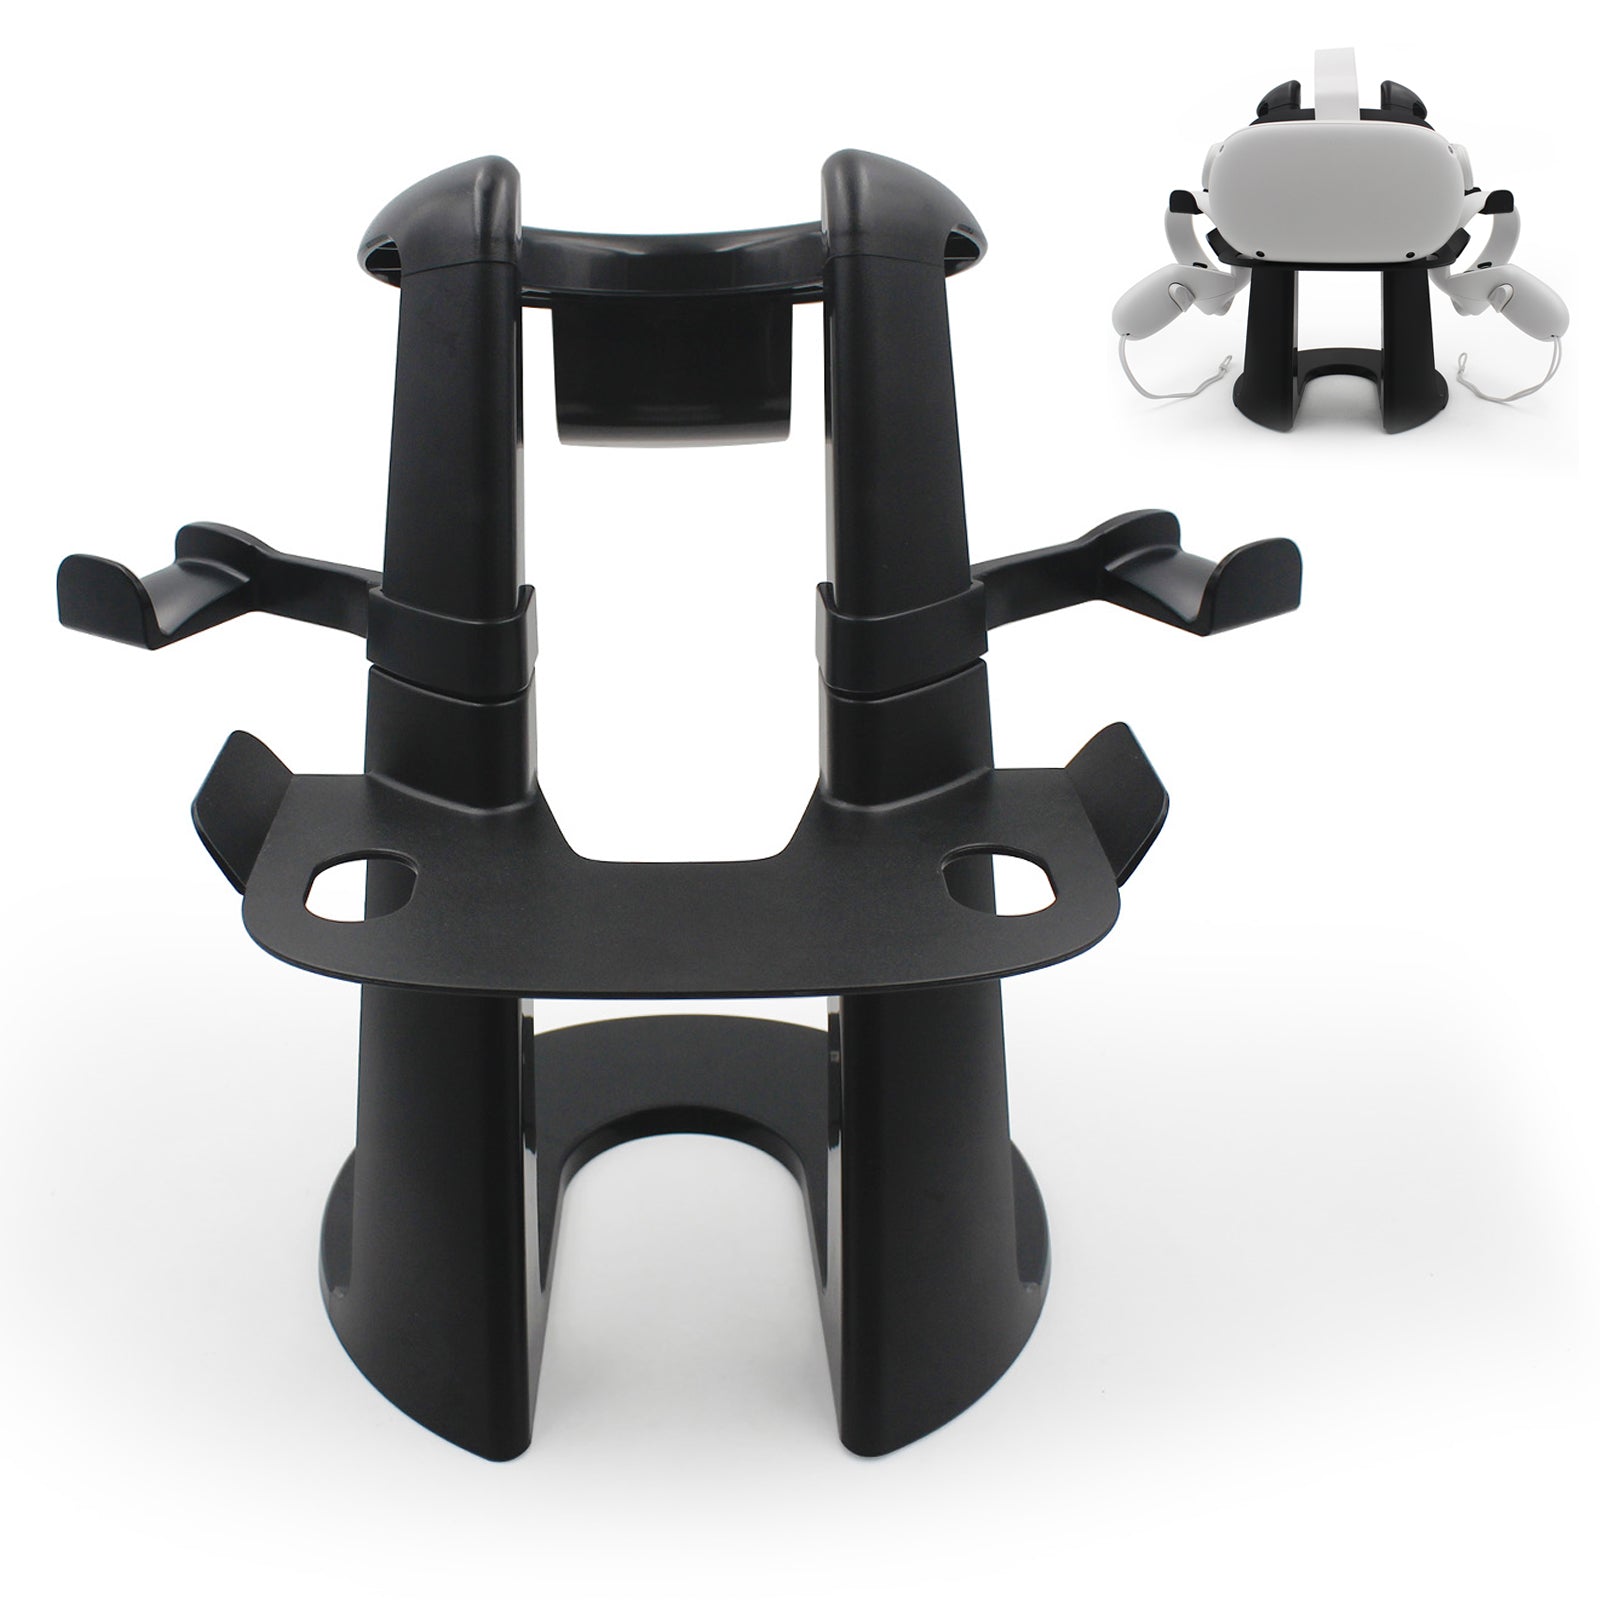 Black VR headset and controller stand.